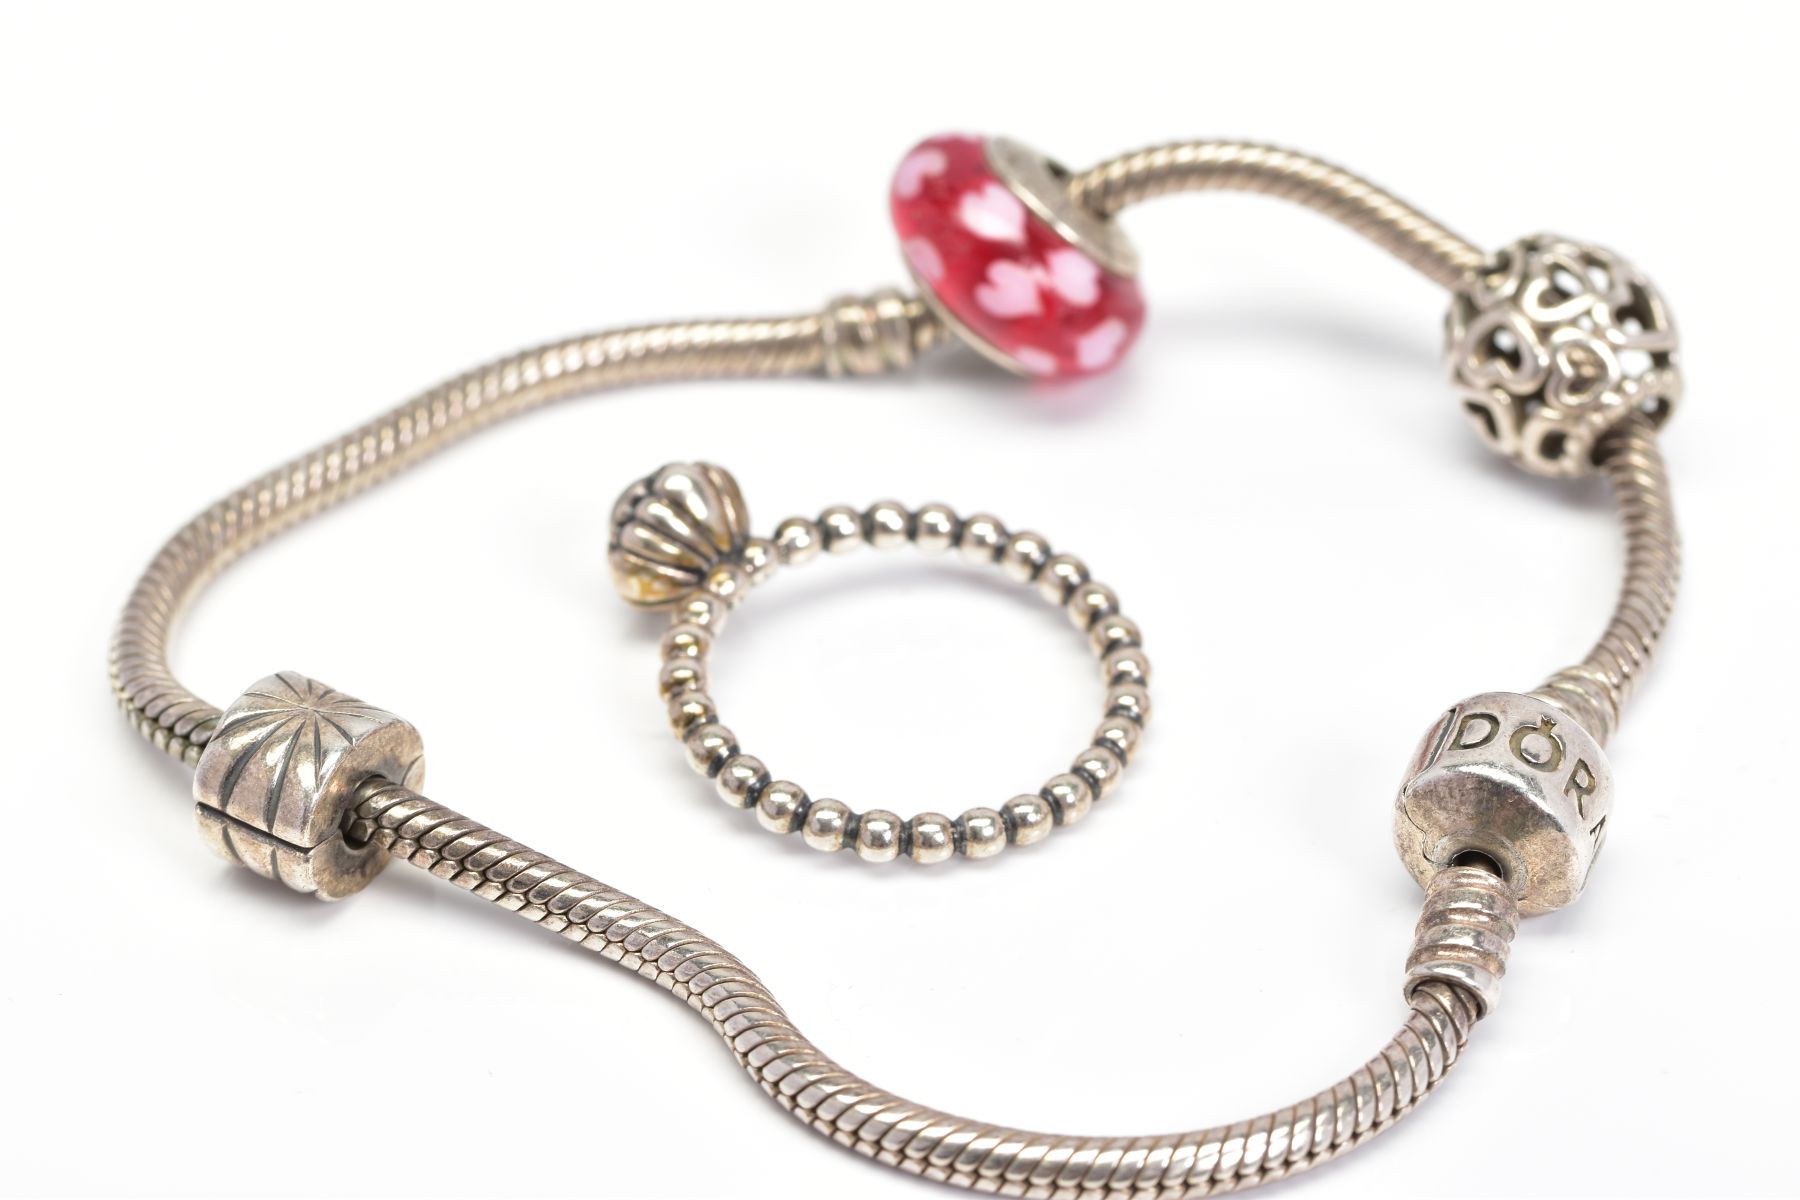 A PANDORA CHARM BRACELET AND RING, the charm bracelet suspending two charms and a spacer charm, - Image 2 of 3